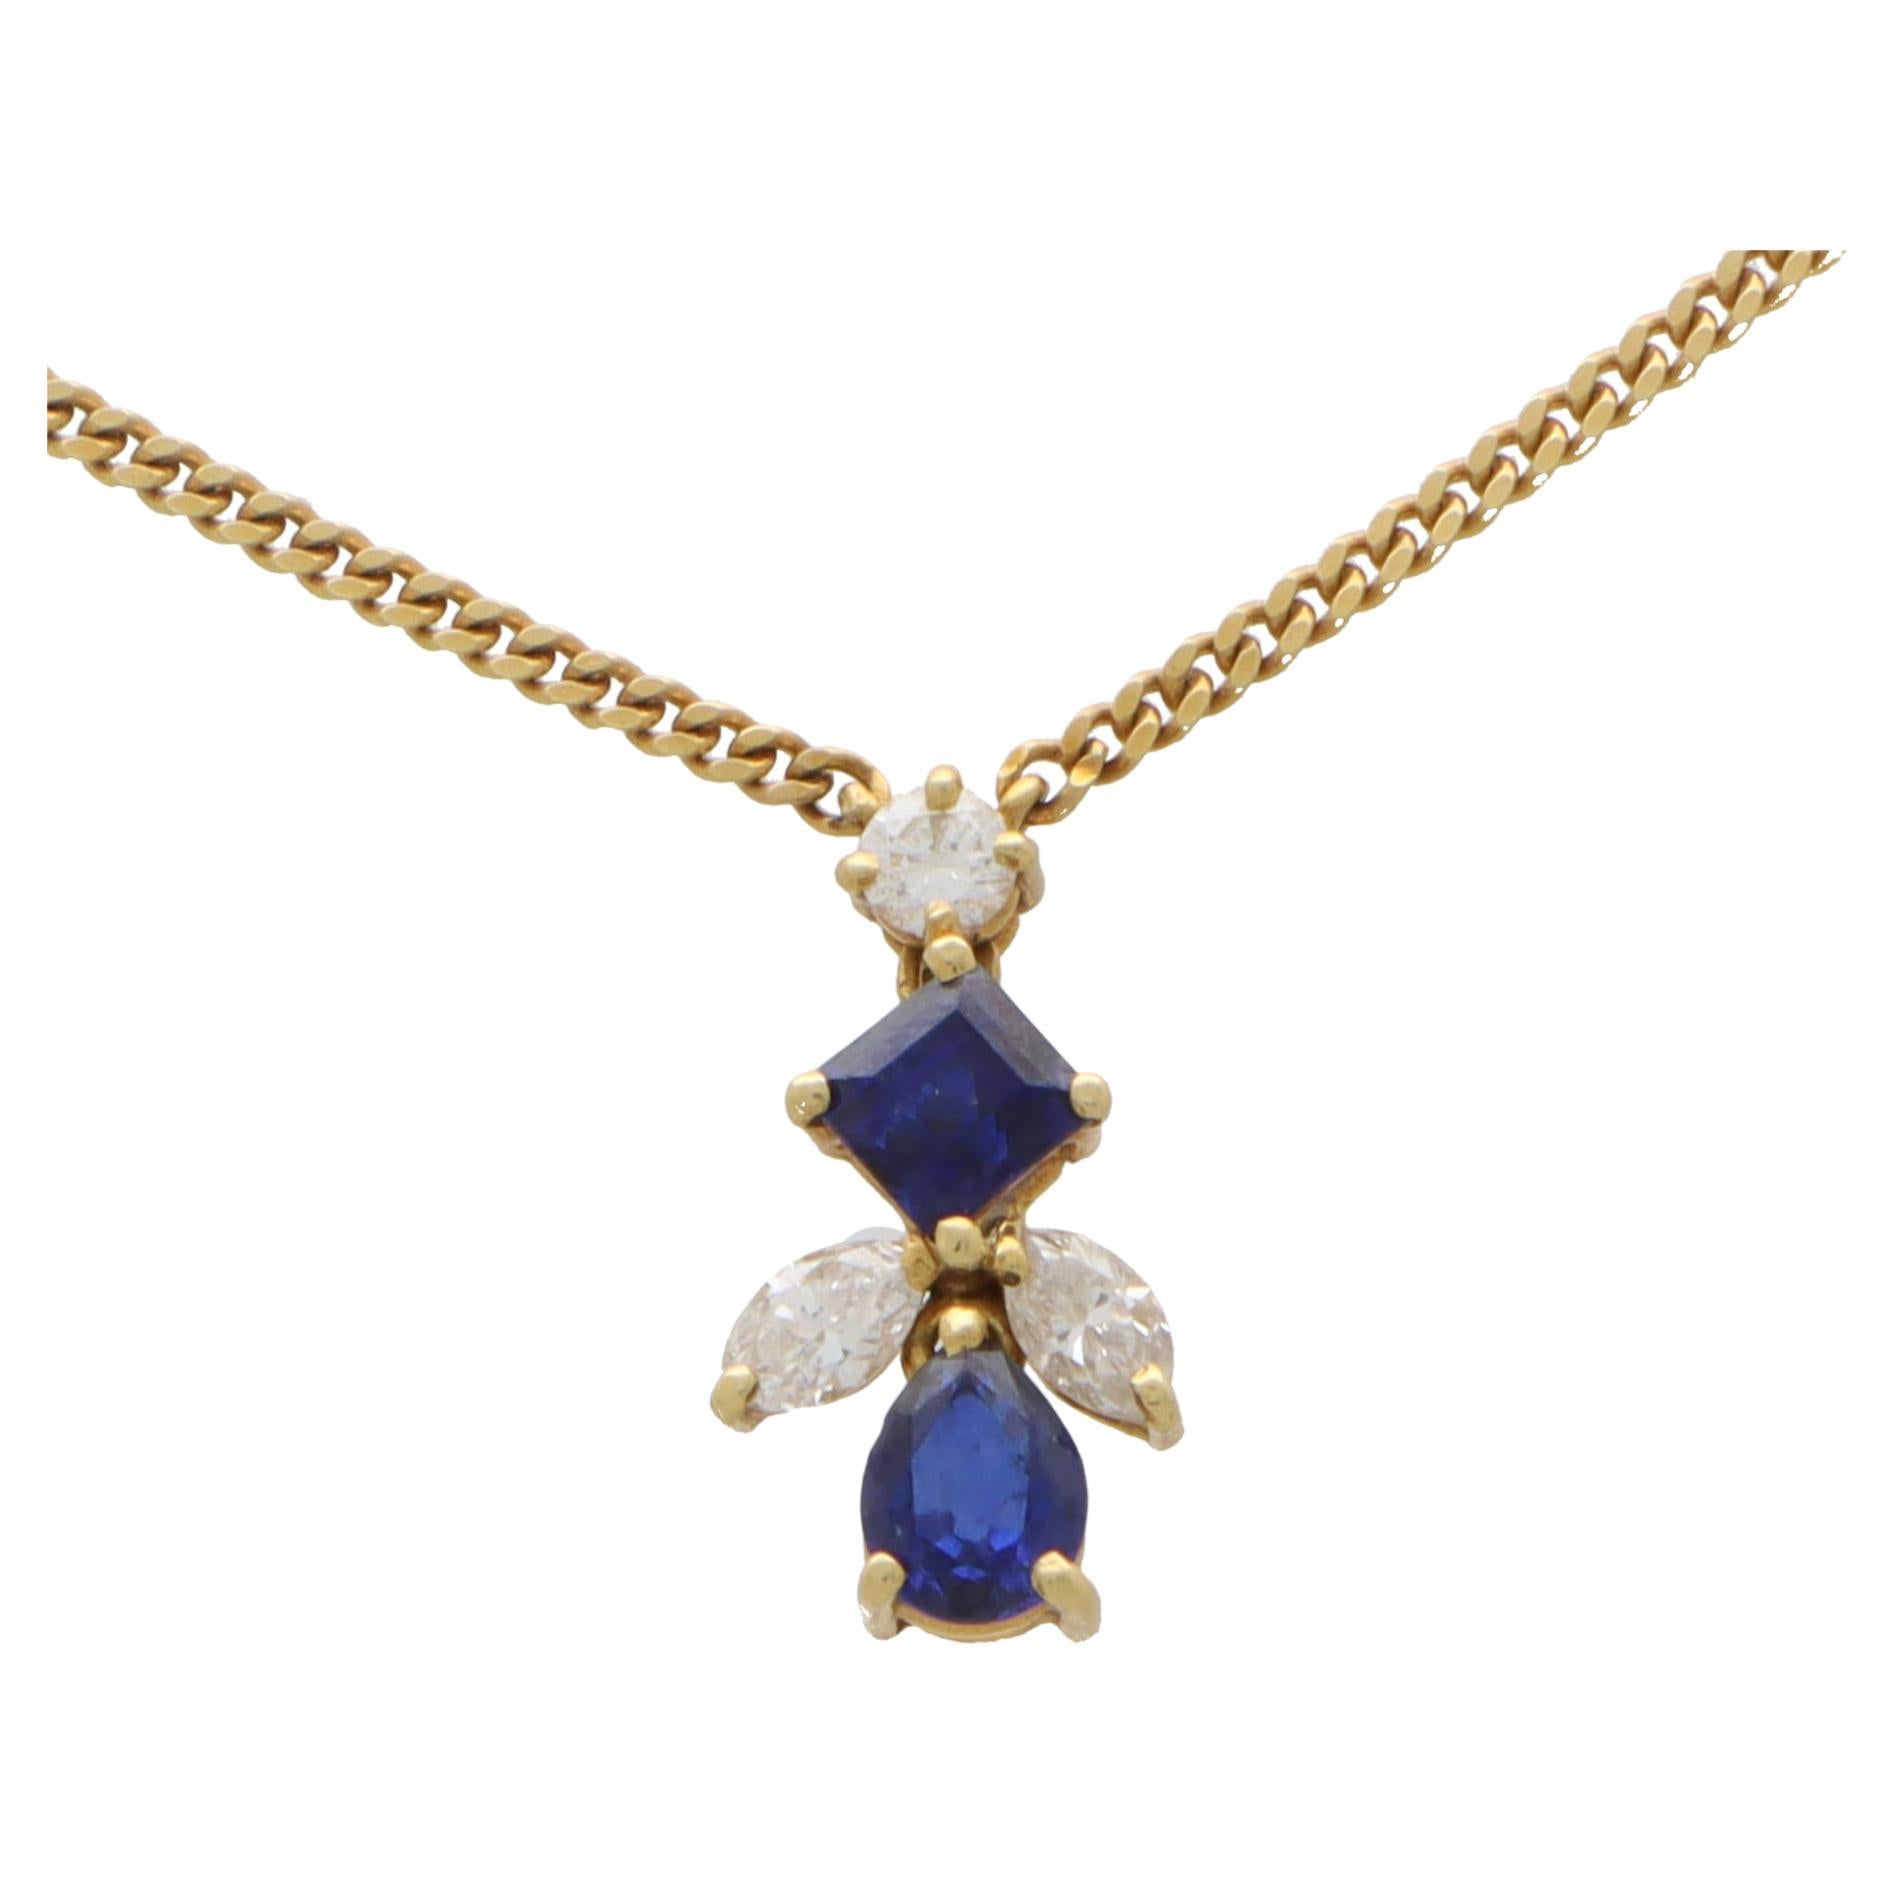  Vintage Sapphire and Diamond Abstract Pendant Necklace Set in 18k Yellow Gold